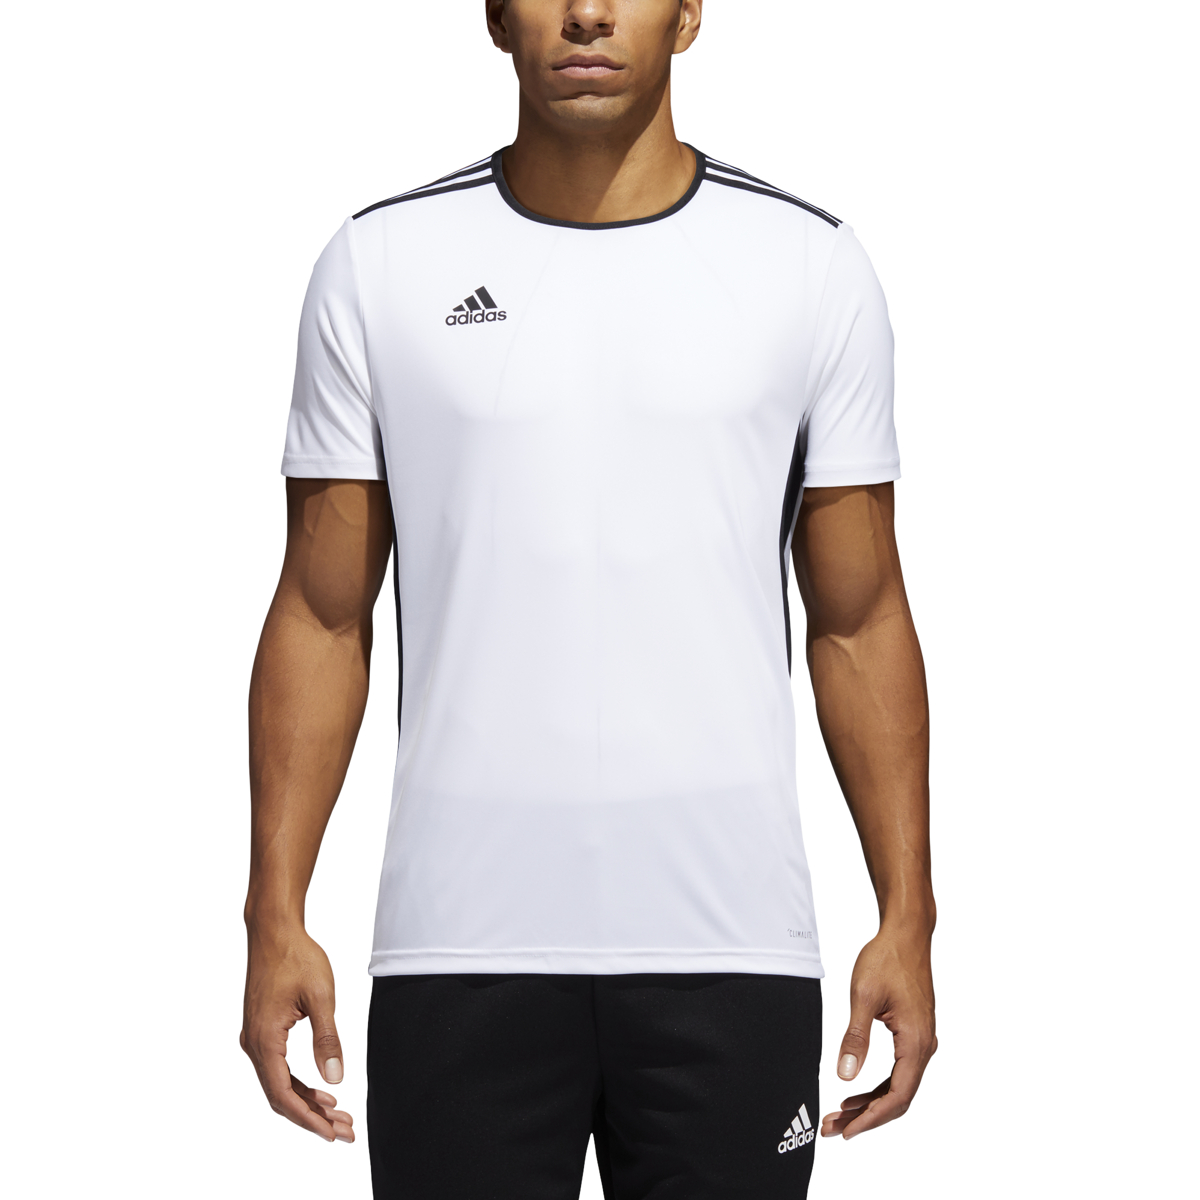 Adidas Men's Soccer Entrada 18 Jersey Adidas - Ships Directly From Adidas - image 1 of 6